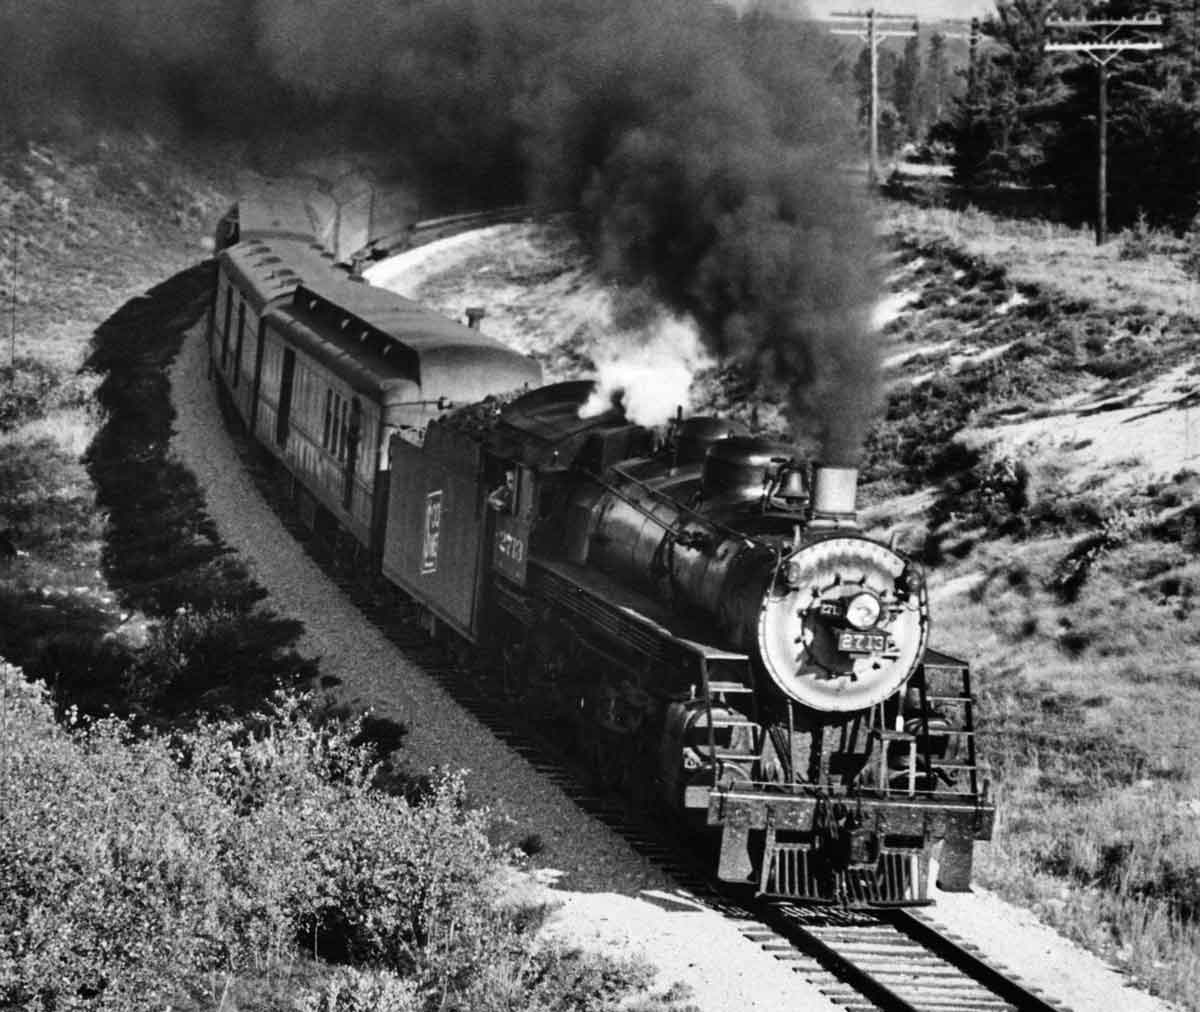 a steam engine pulling passenger cars around a curve